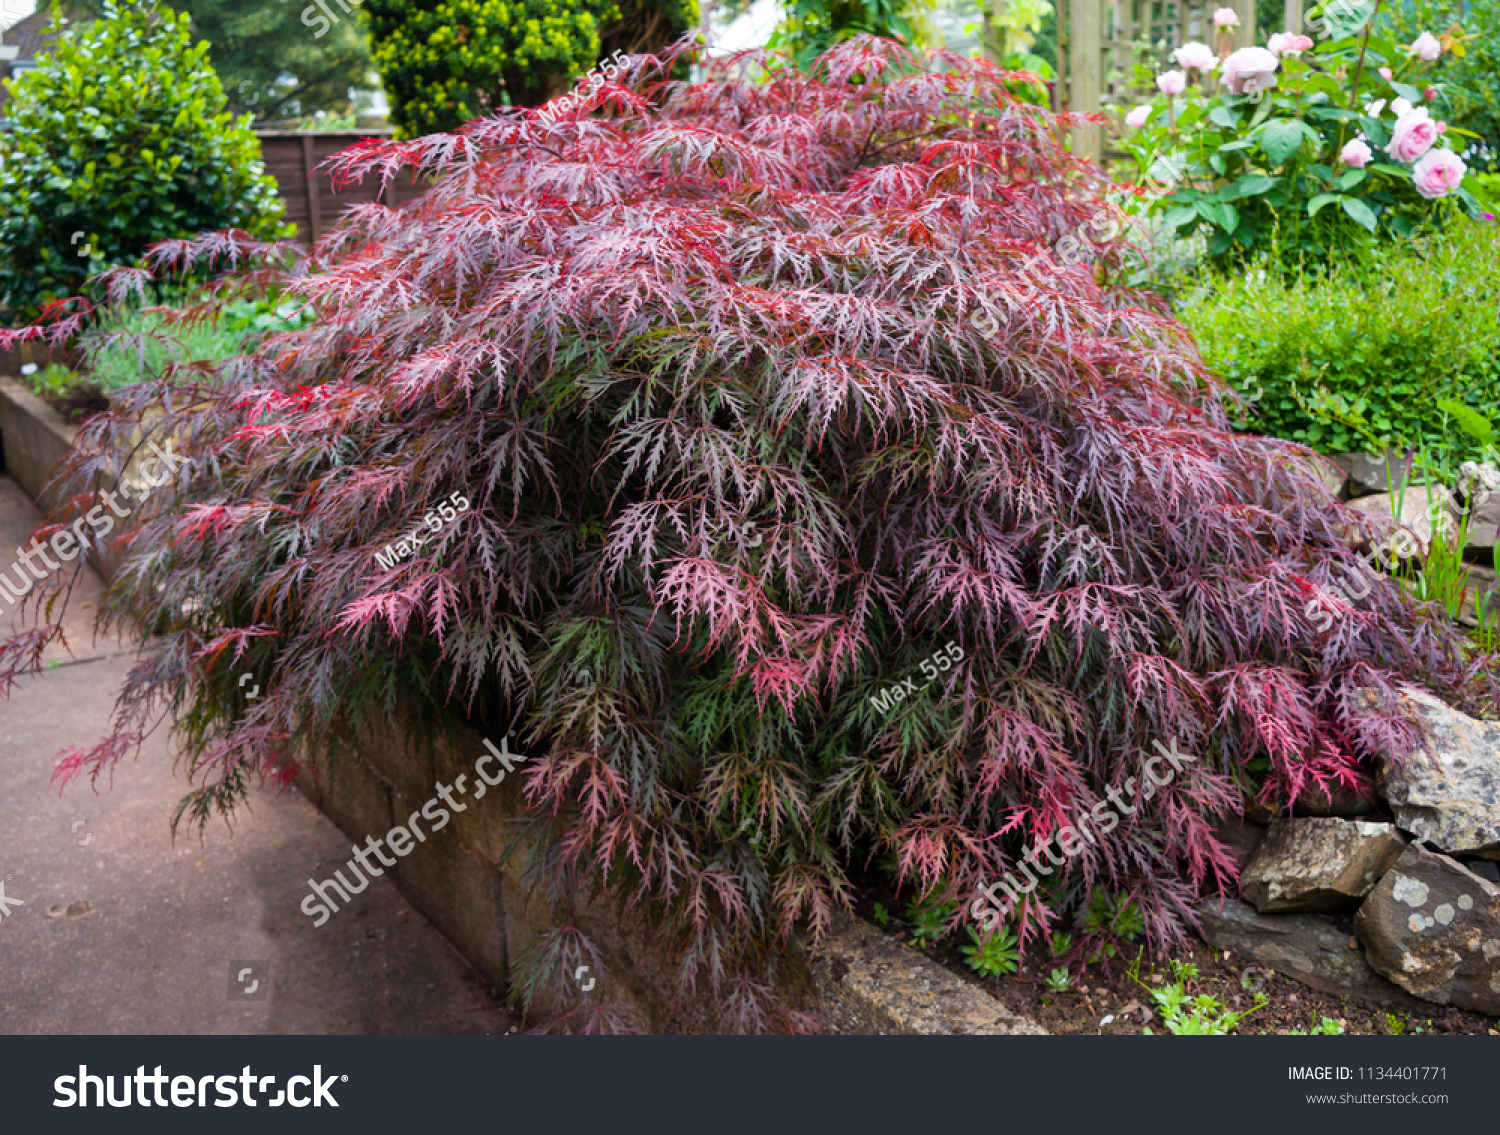 Red foliage of the weeping Laceleaf Japanese Maple tree (Acer palmatum) in garden #1134401771